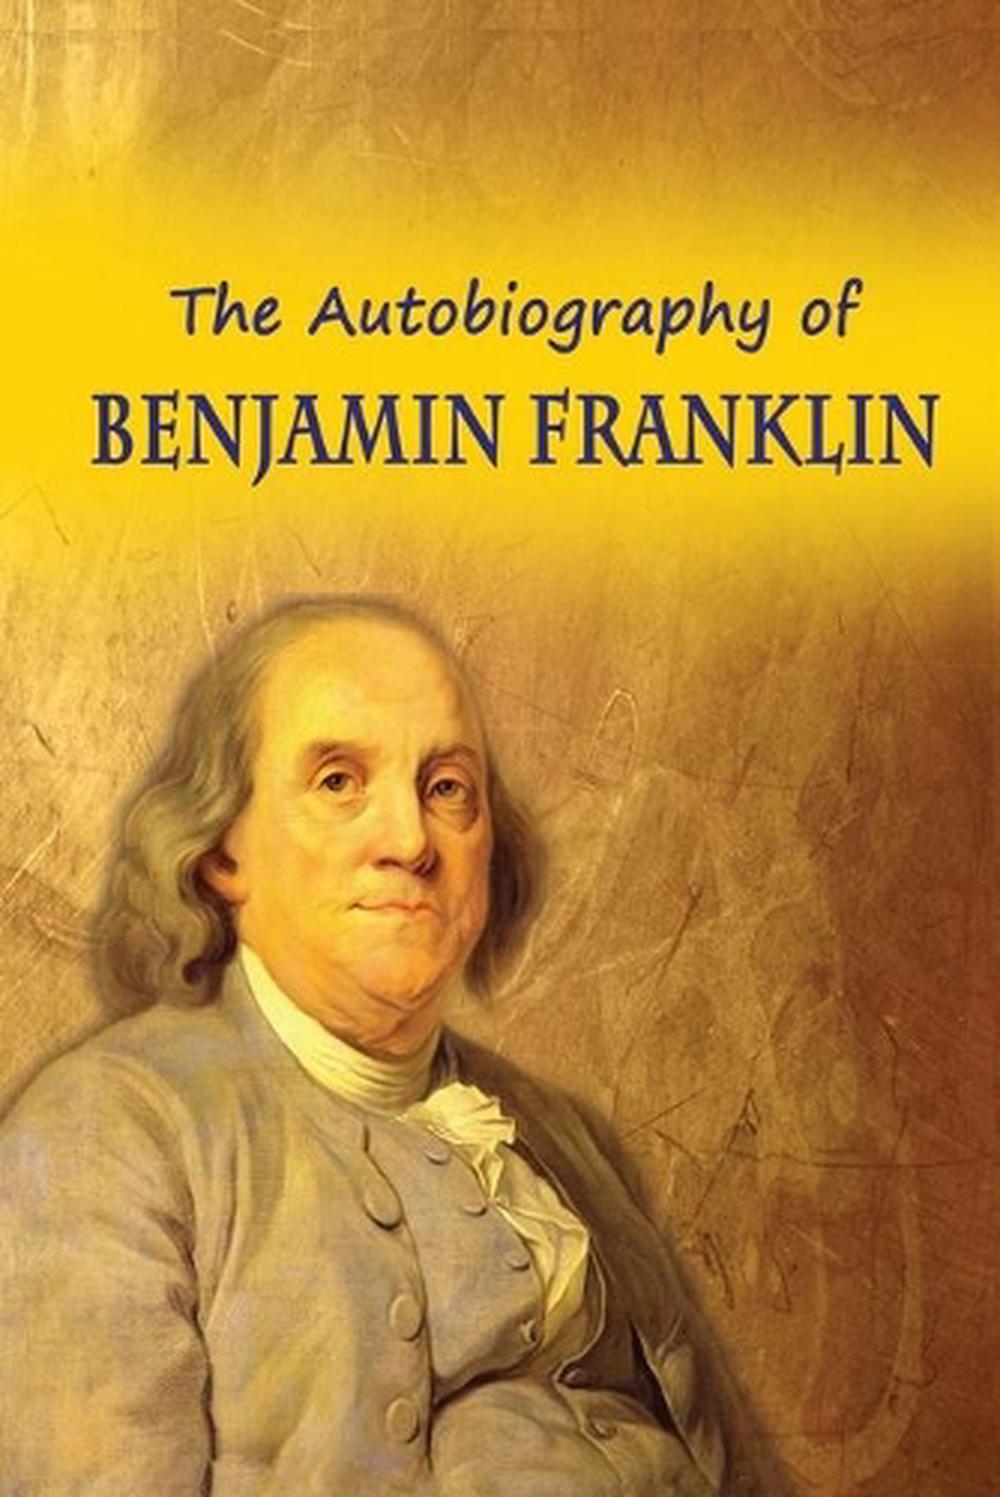 autobiography of benjamin franklin pages